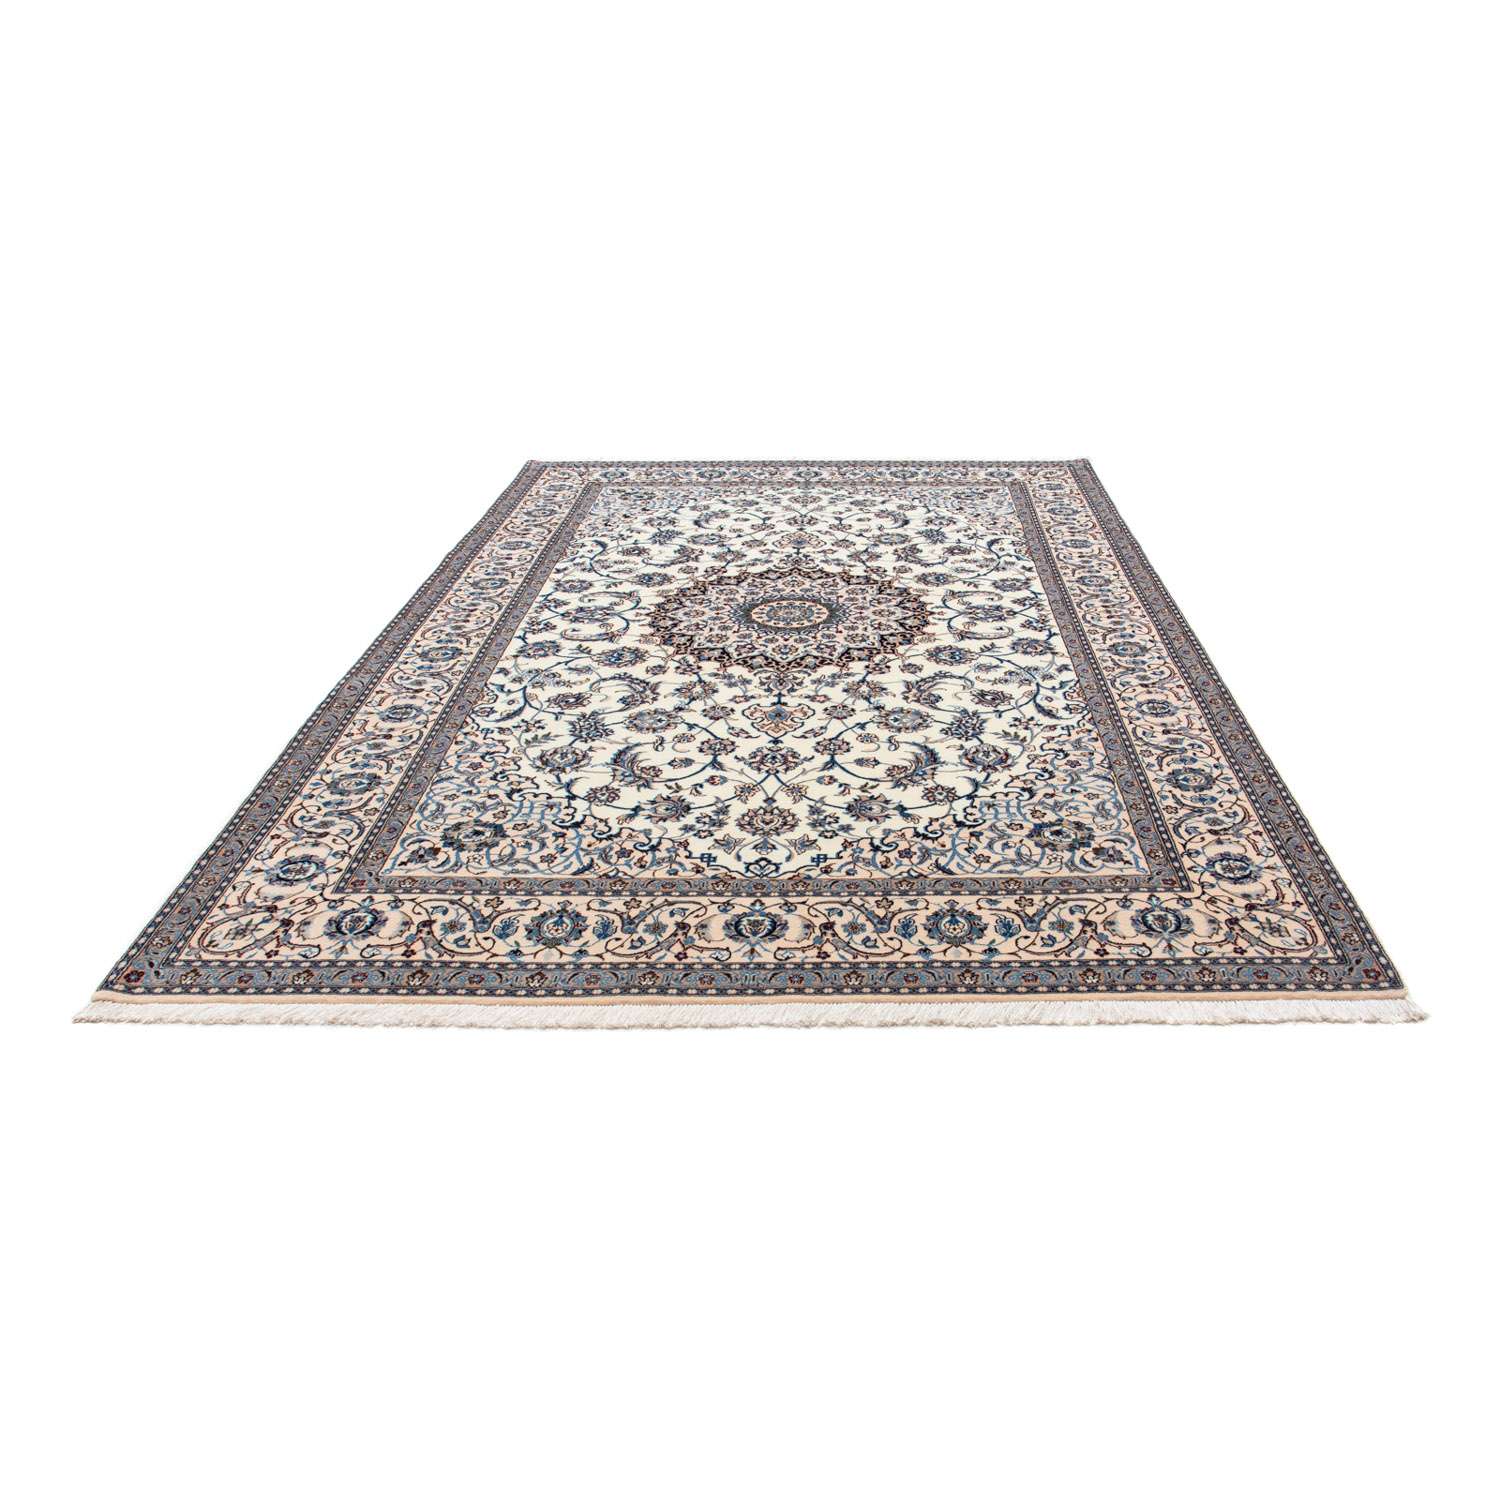 Persisk teppe - Nain - Royal - 300 x 208 cm - beige